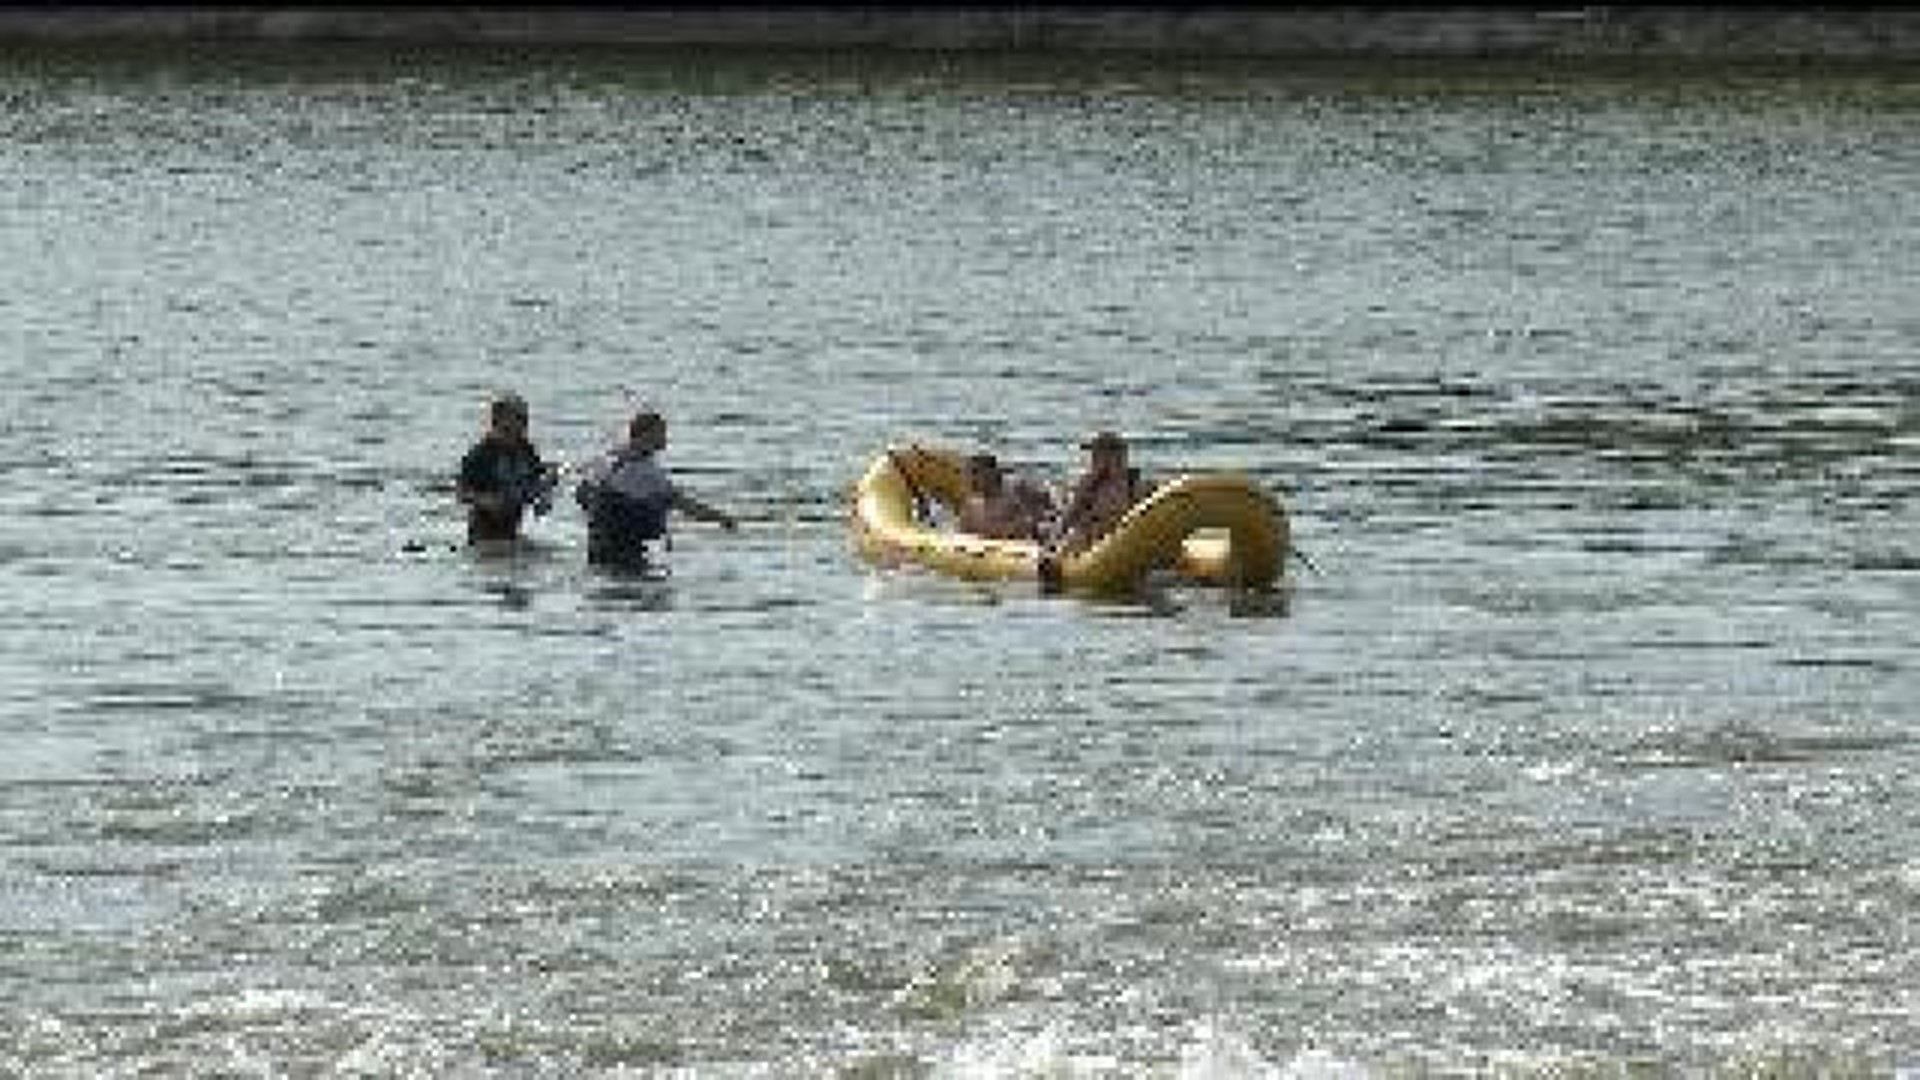 Men rescued from Rock River